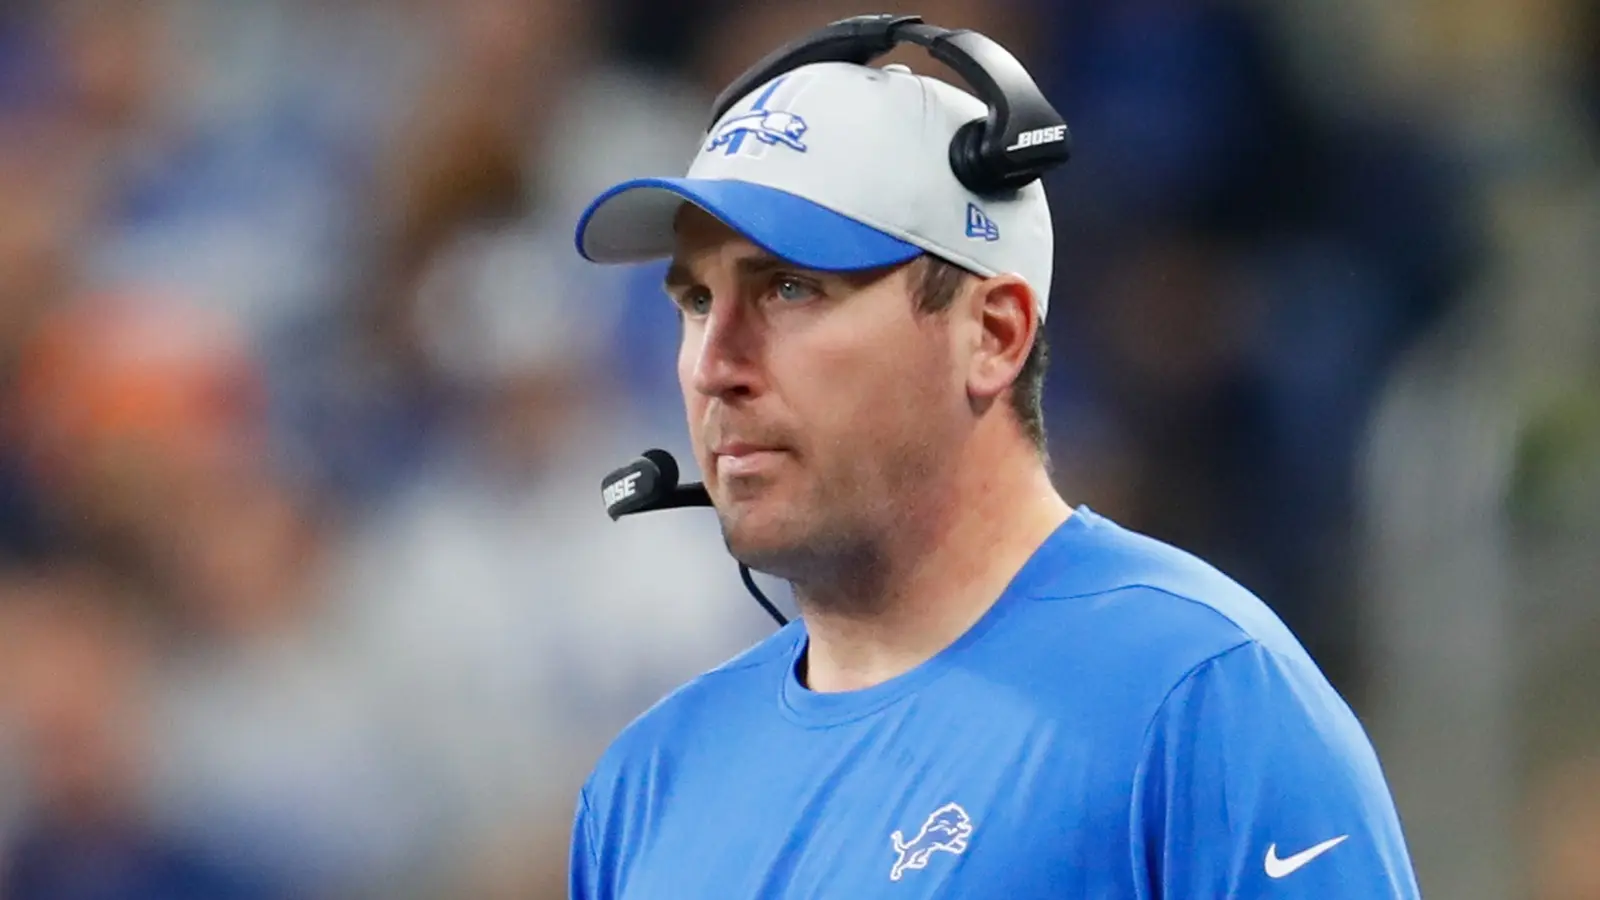 Colts finalizing deal to hire Jim Bob Cooter as new offensive coordinator